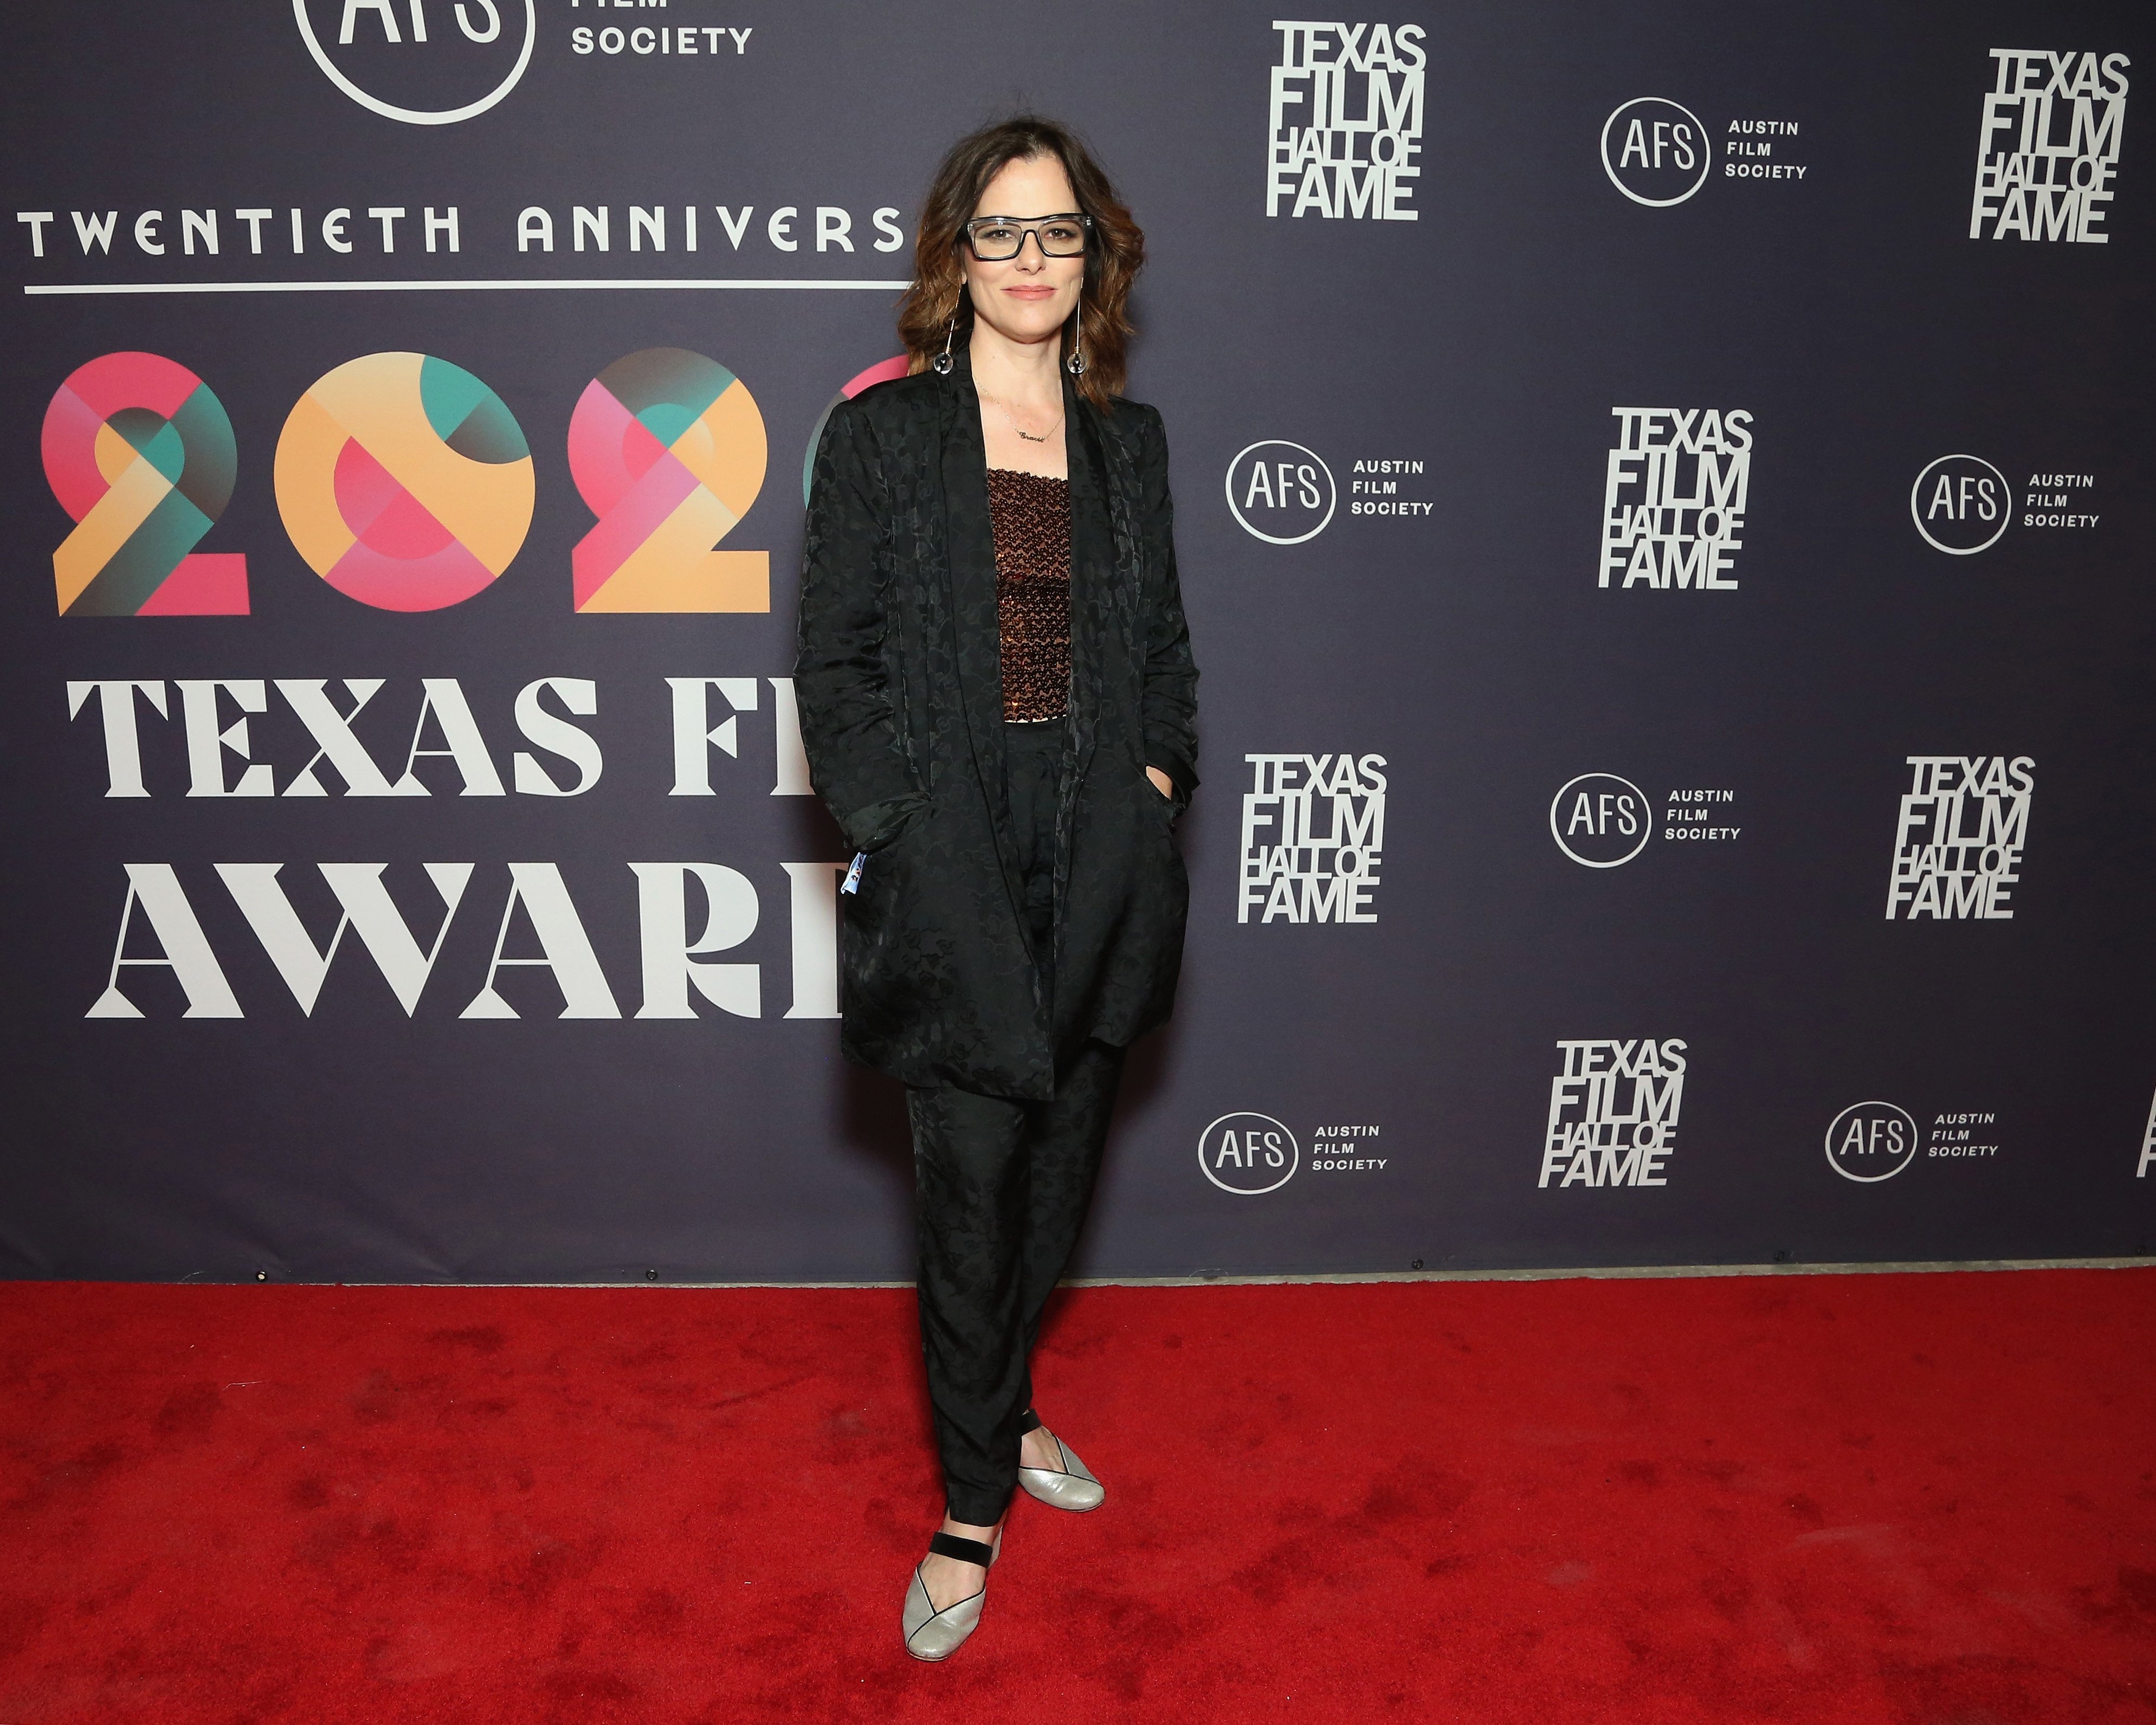 Parker Posey at the Austin Film Society's 20th annual Texas Film Awards on March 12, 2020, in Texas. | Source: Getty Images